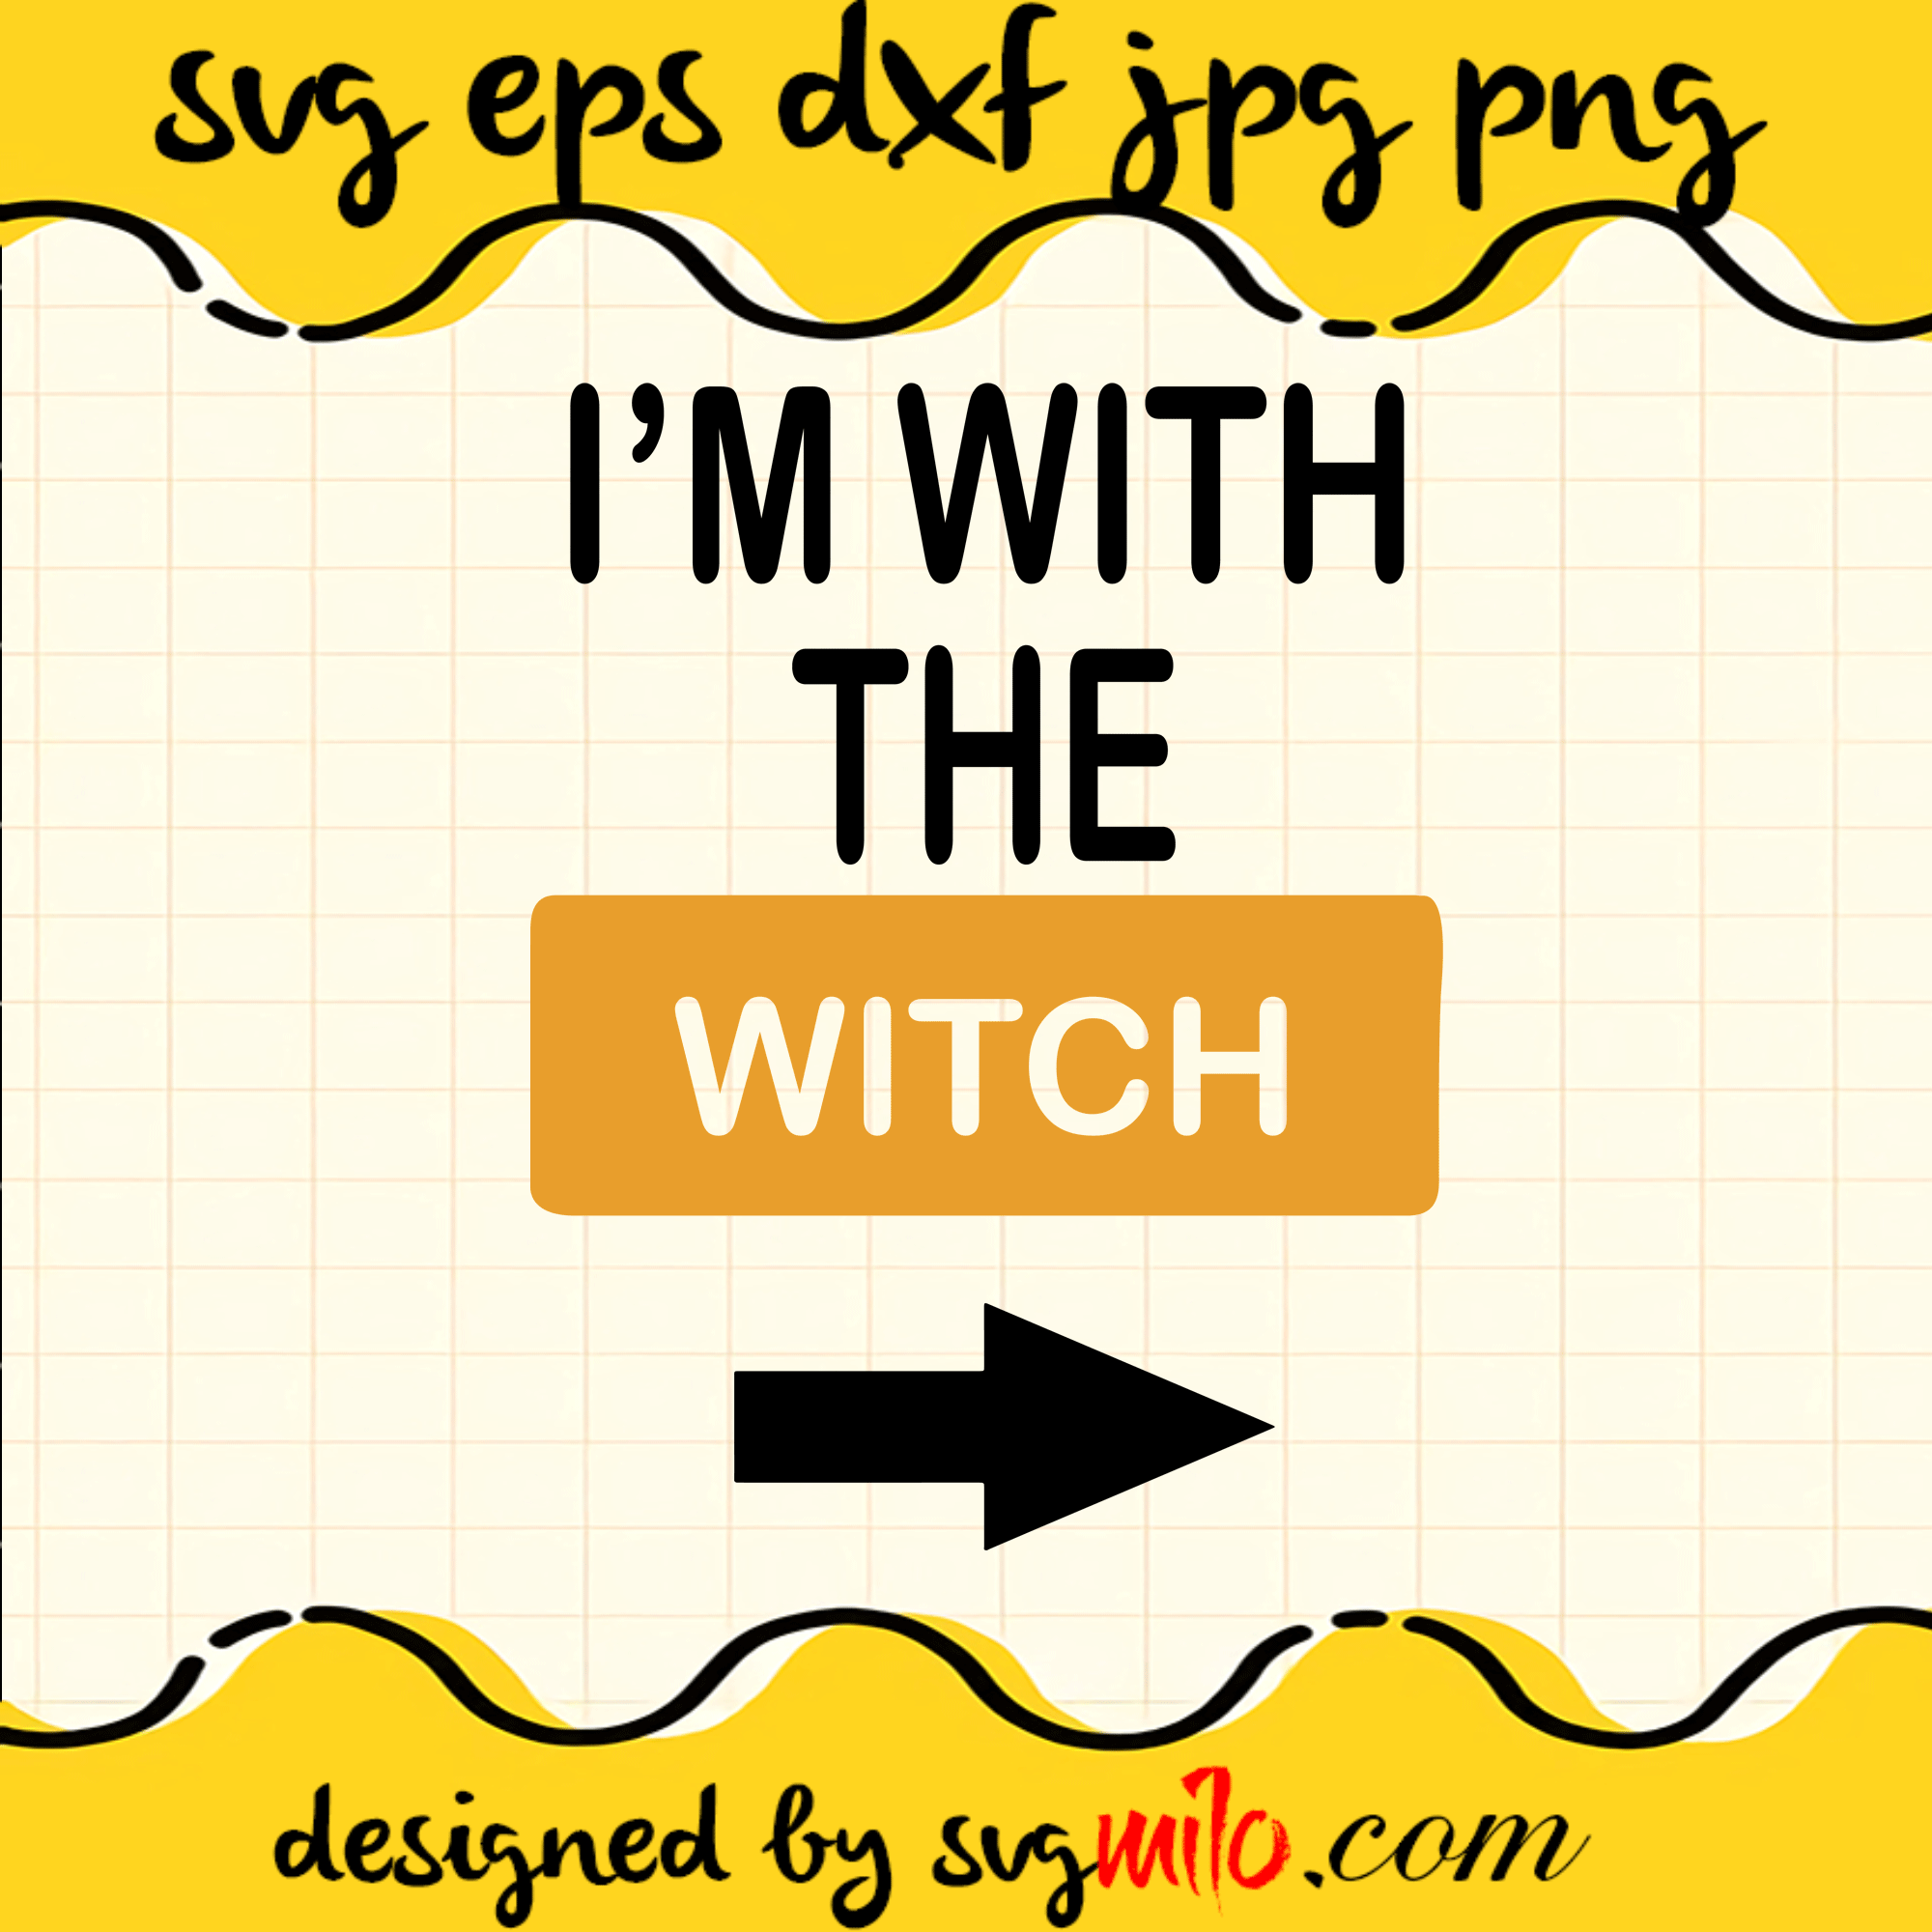 I'm With The Witch SVG Cut Files For Cricut Silhouette,Premium Quality SVG - SVGMILO